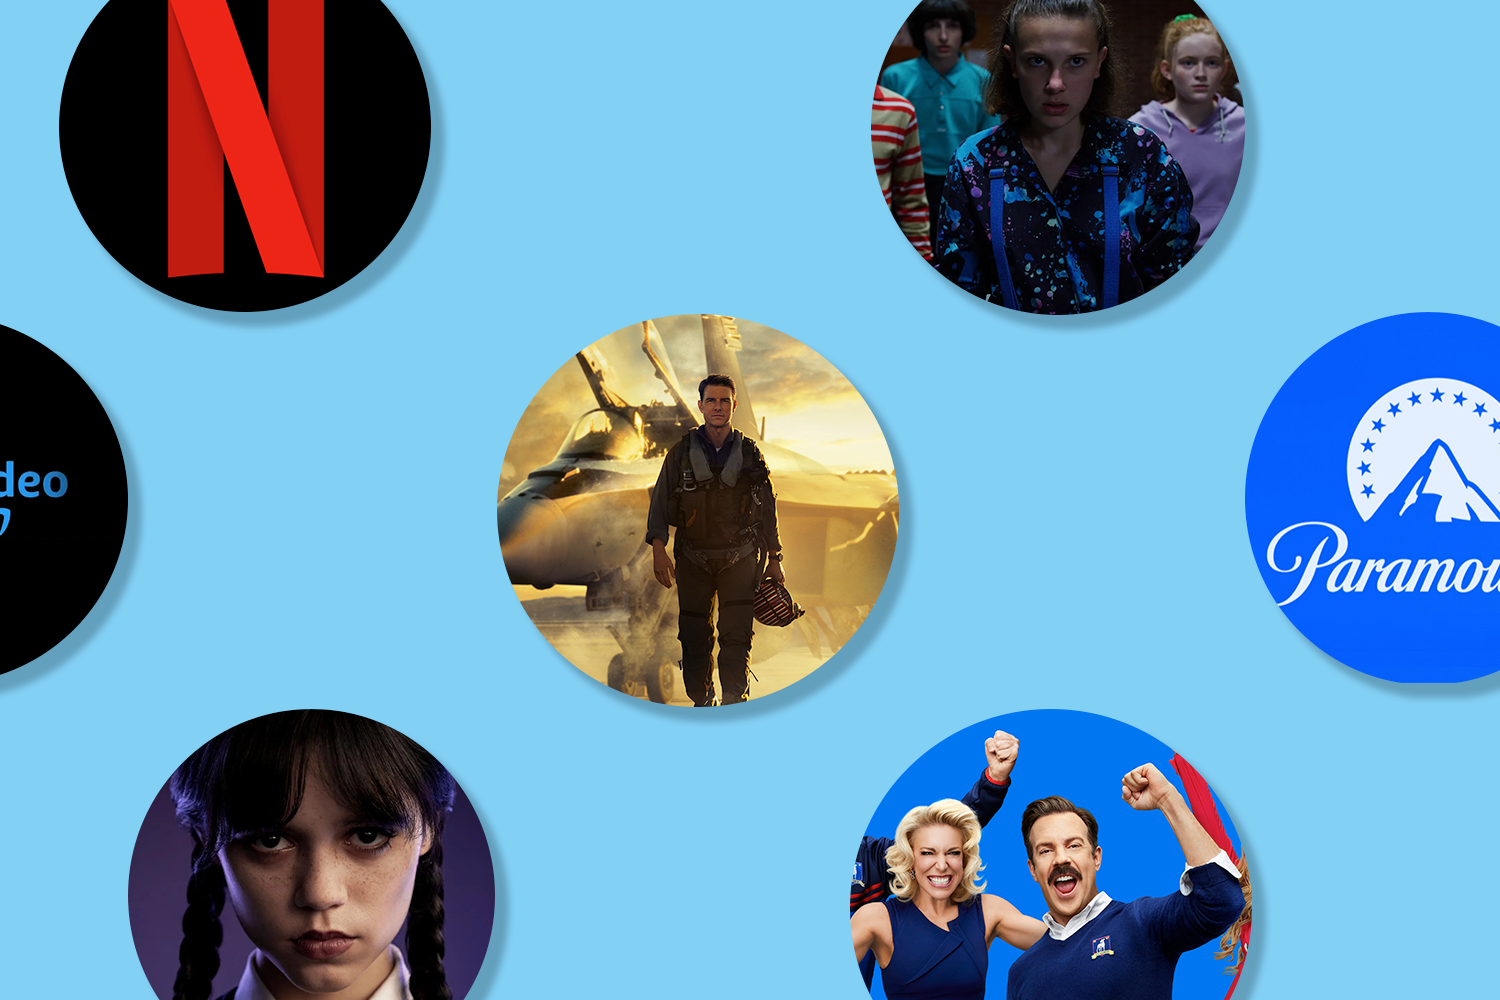 Coming Soon: Everything to Watch on Netflix, Hulu, HBO Max, Prime Video and  in Theaters in March 2022